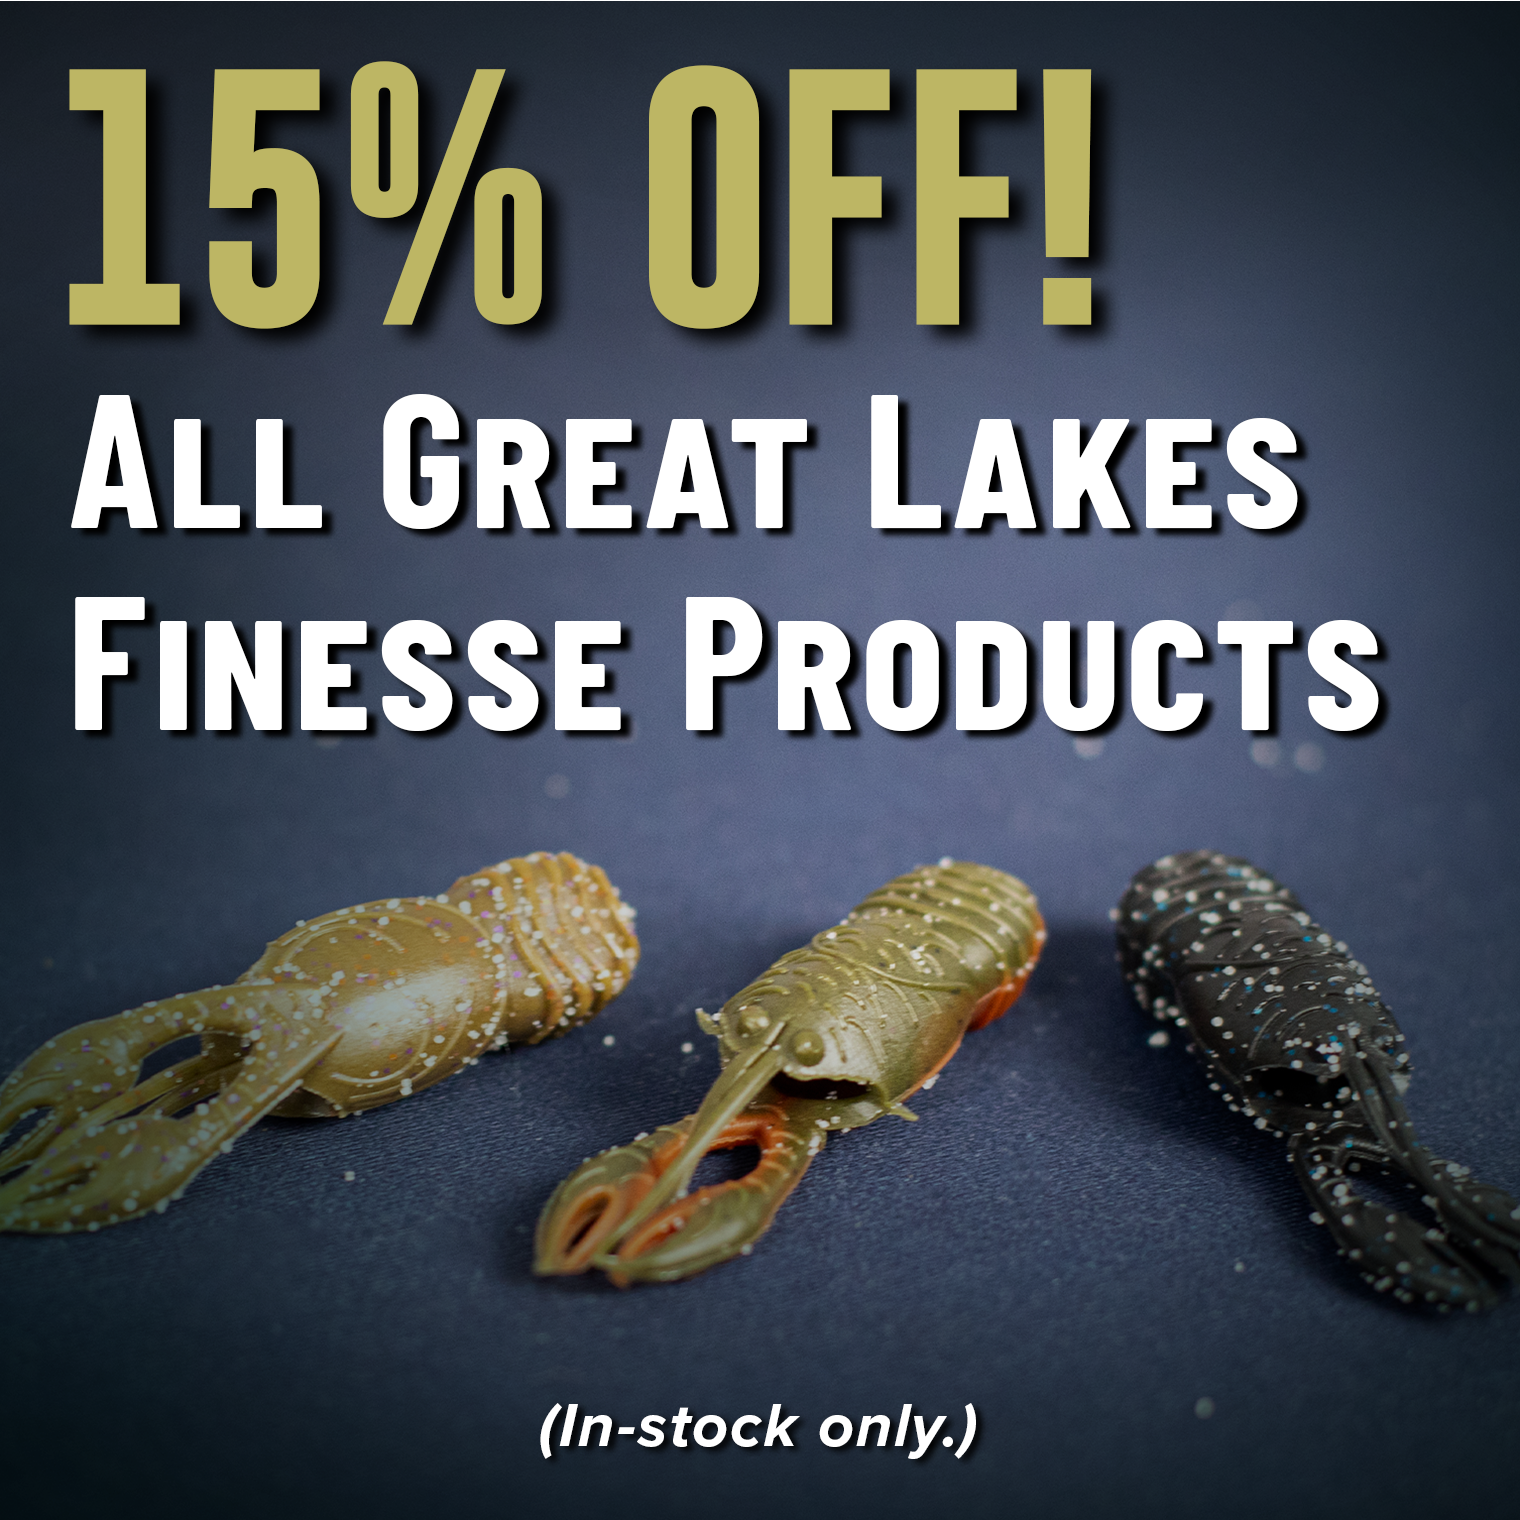 15% Off! All Great Lakes Finesse Products (In-stock only.)